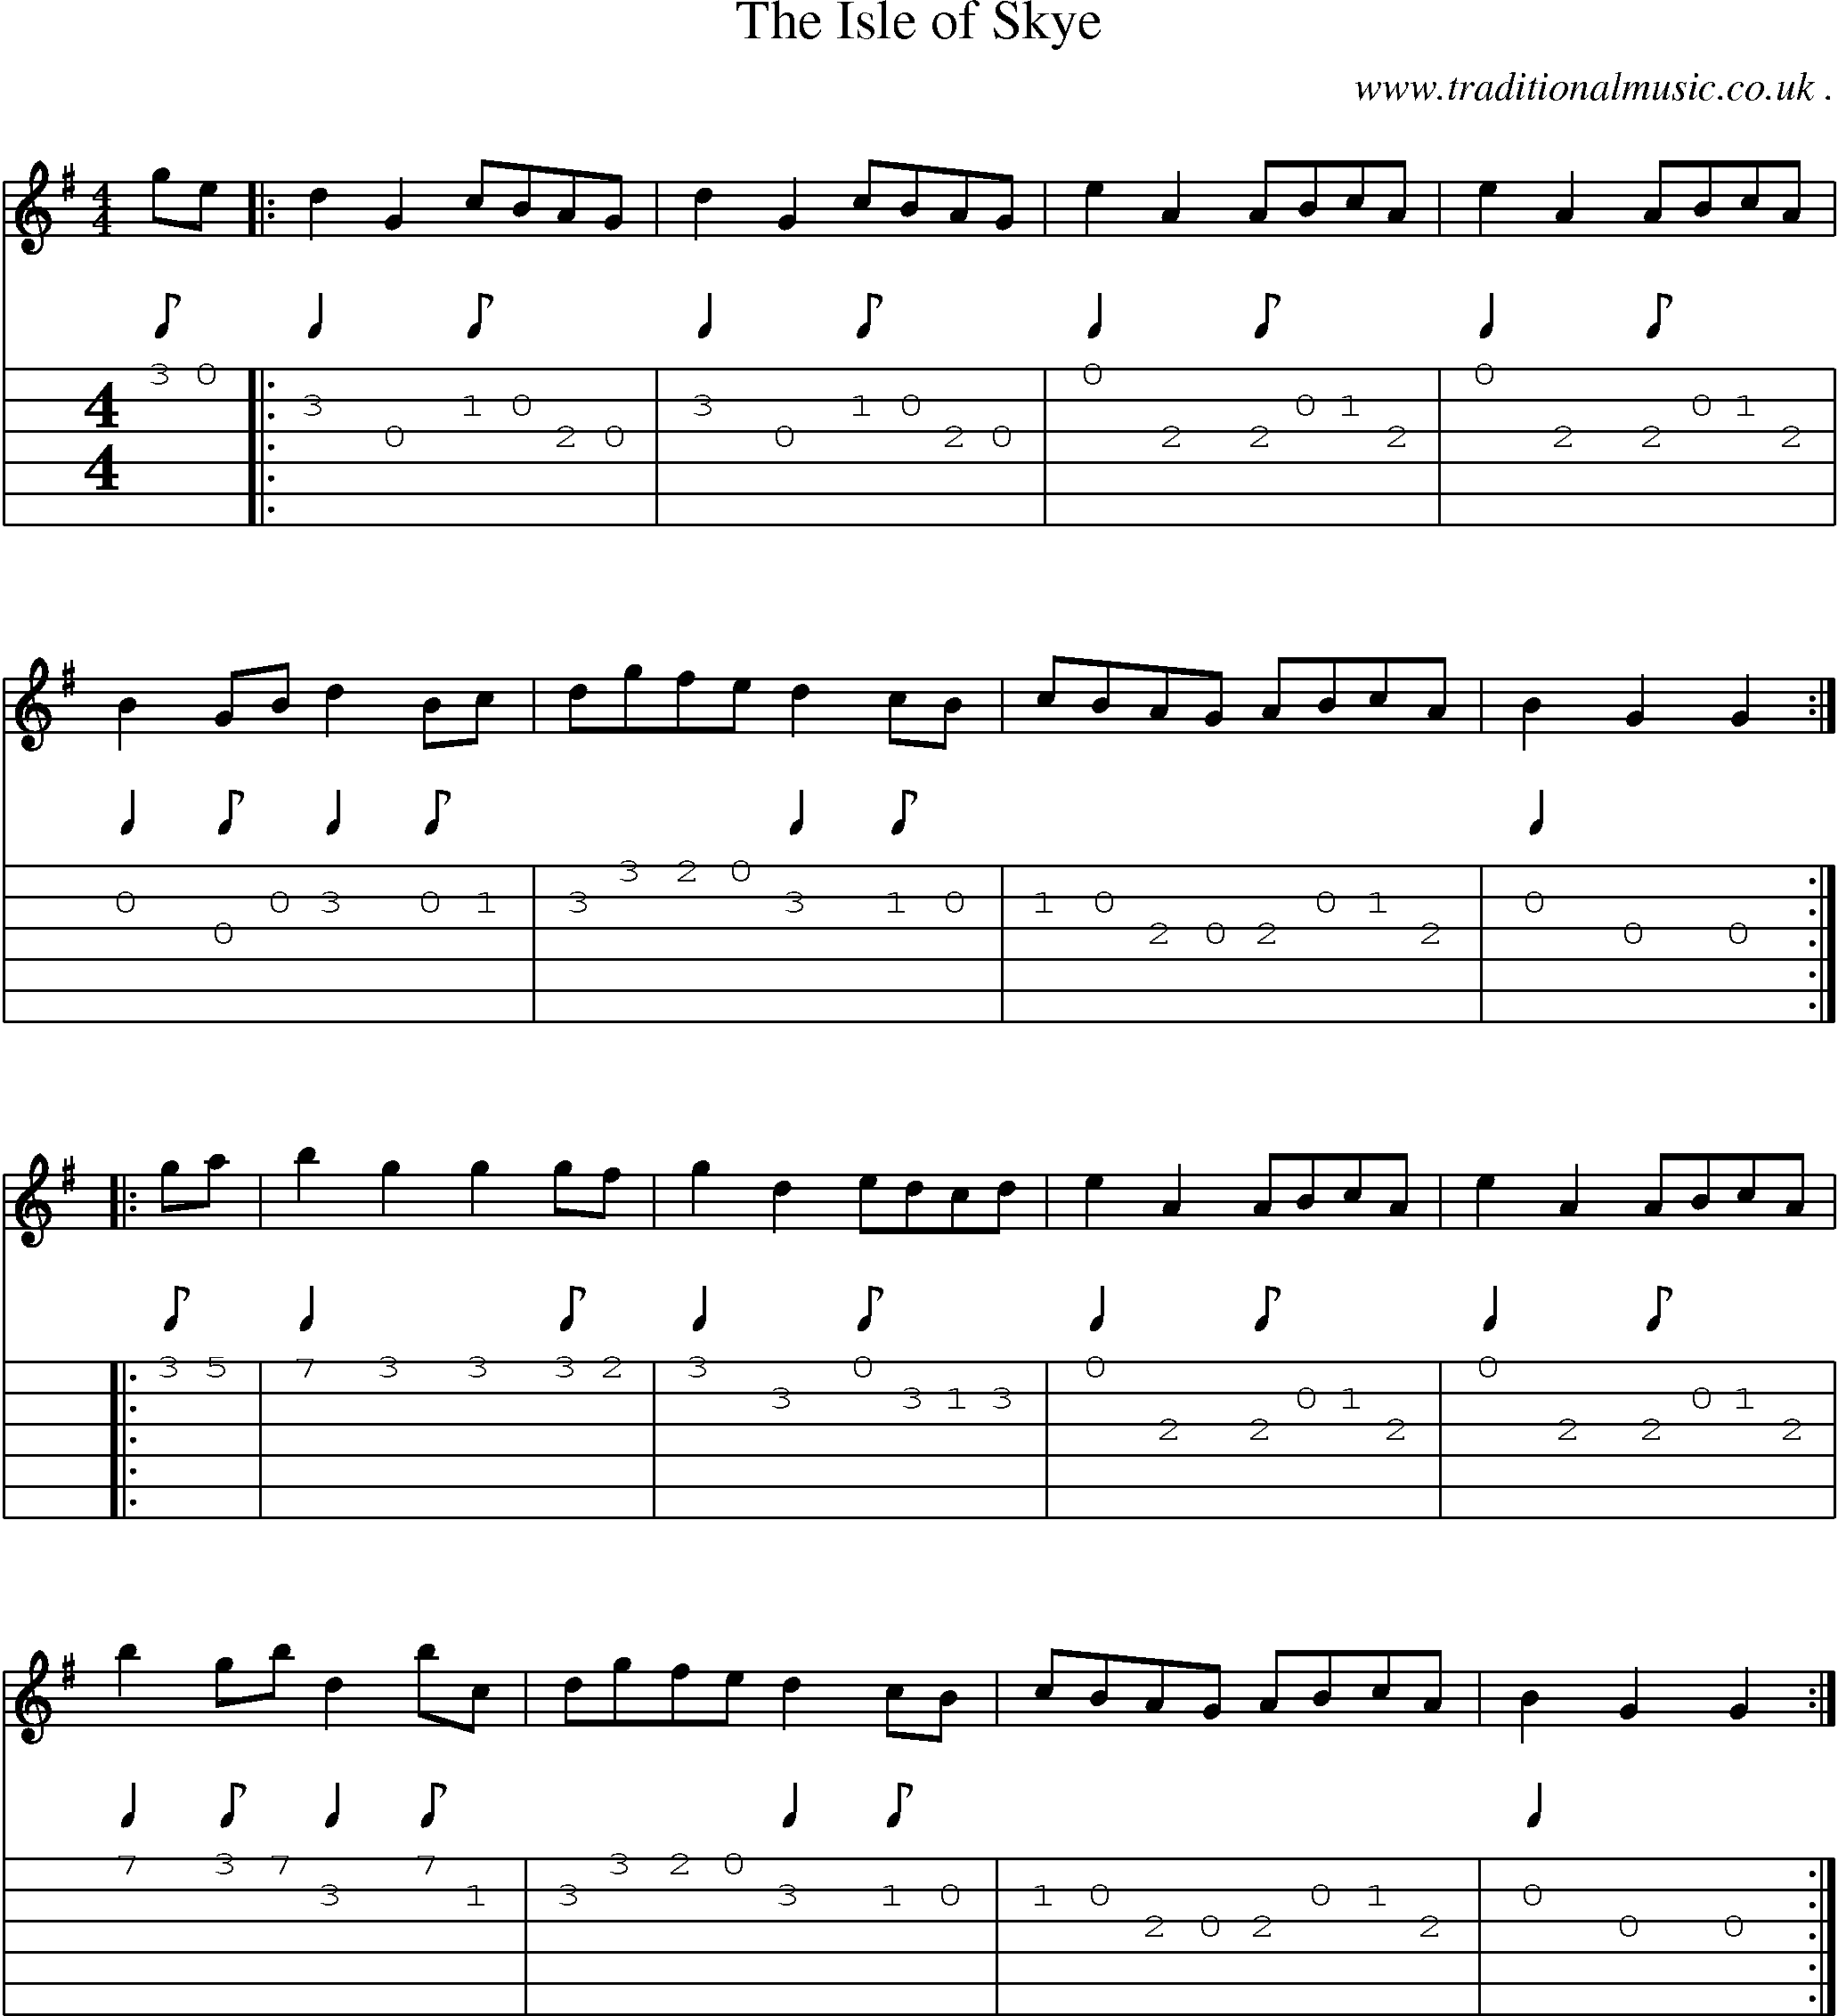 Sheet-music  score, Chords and Guitar Tabs for The Isle Of Skye